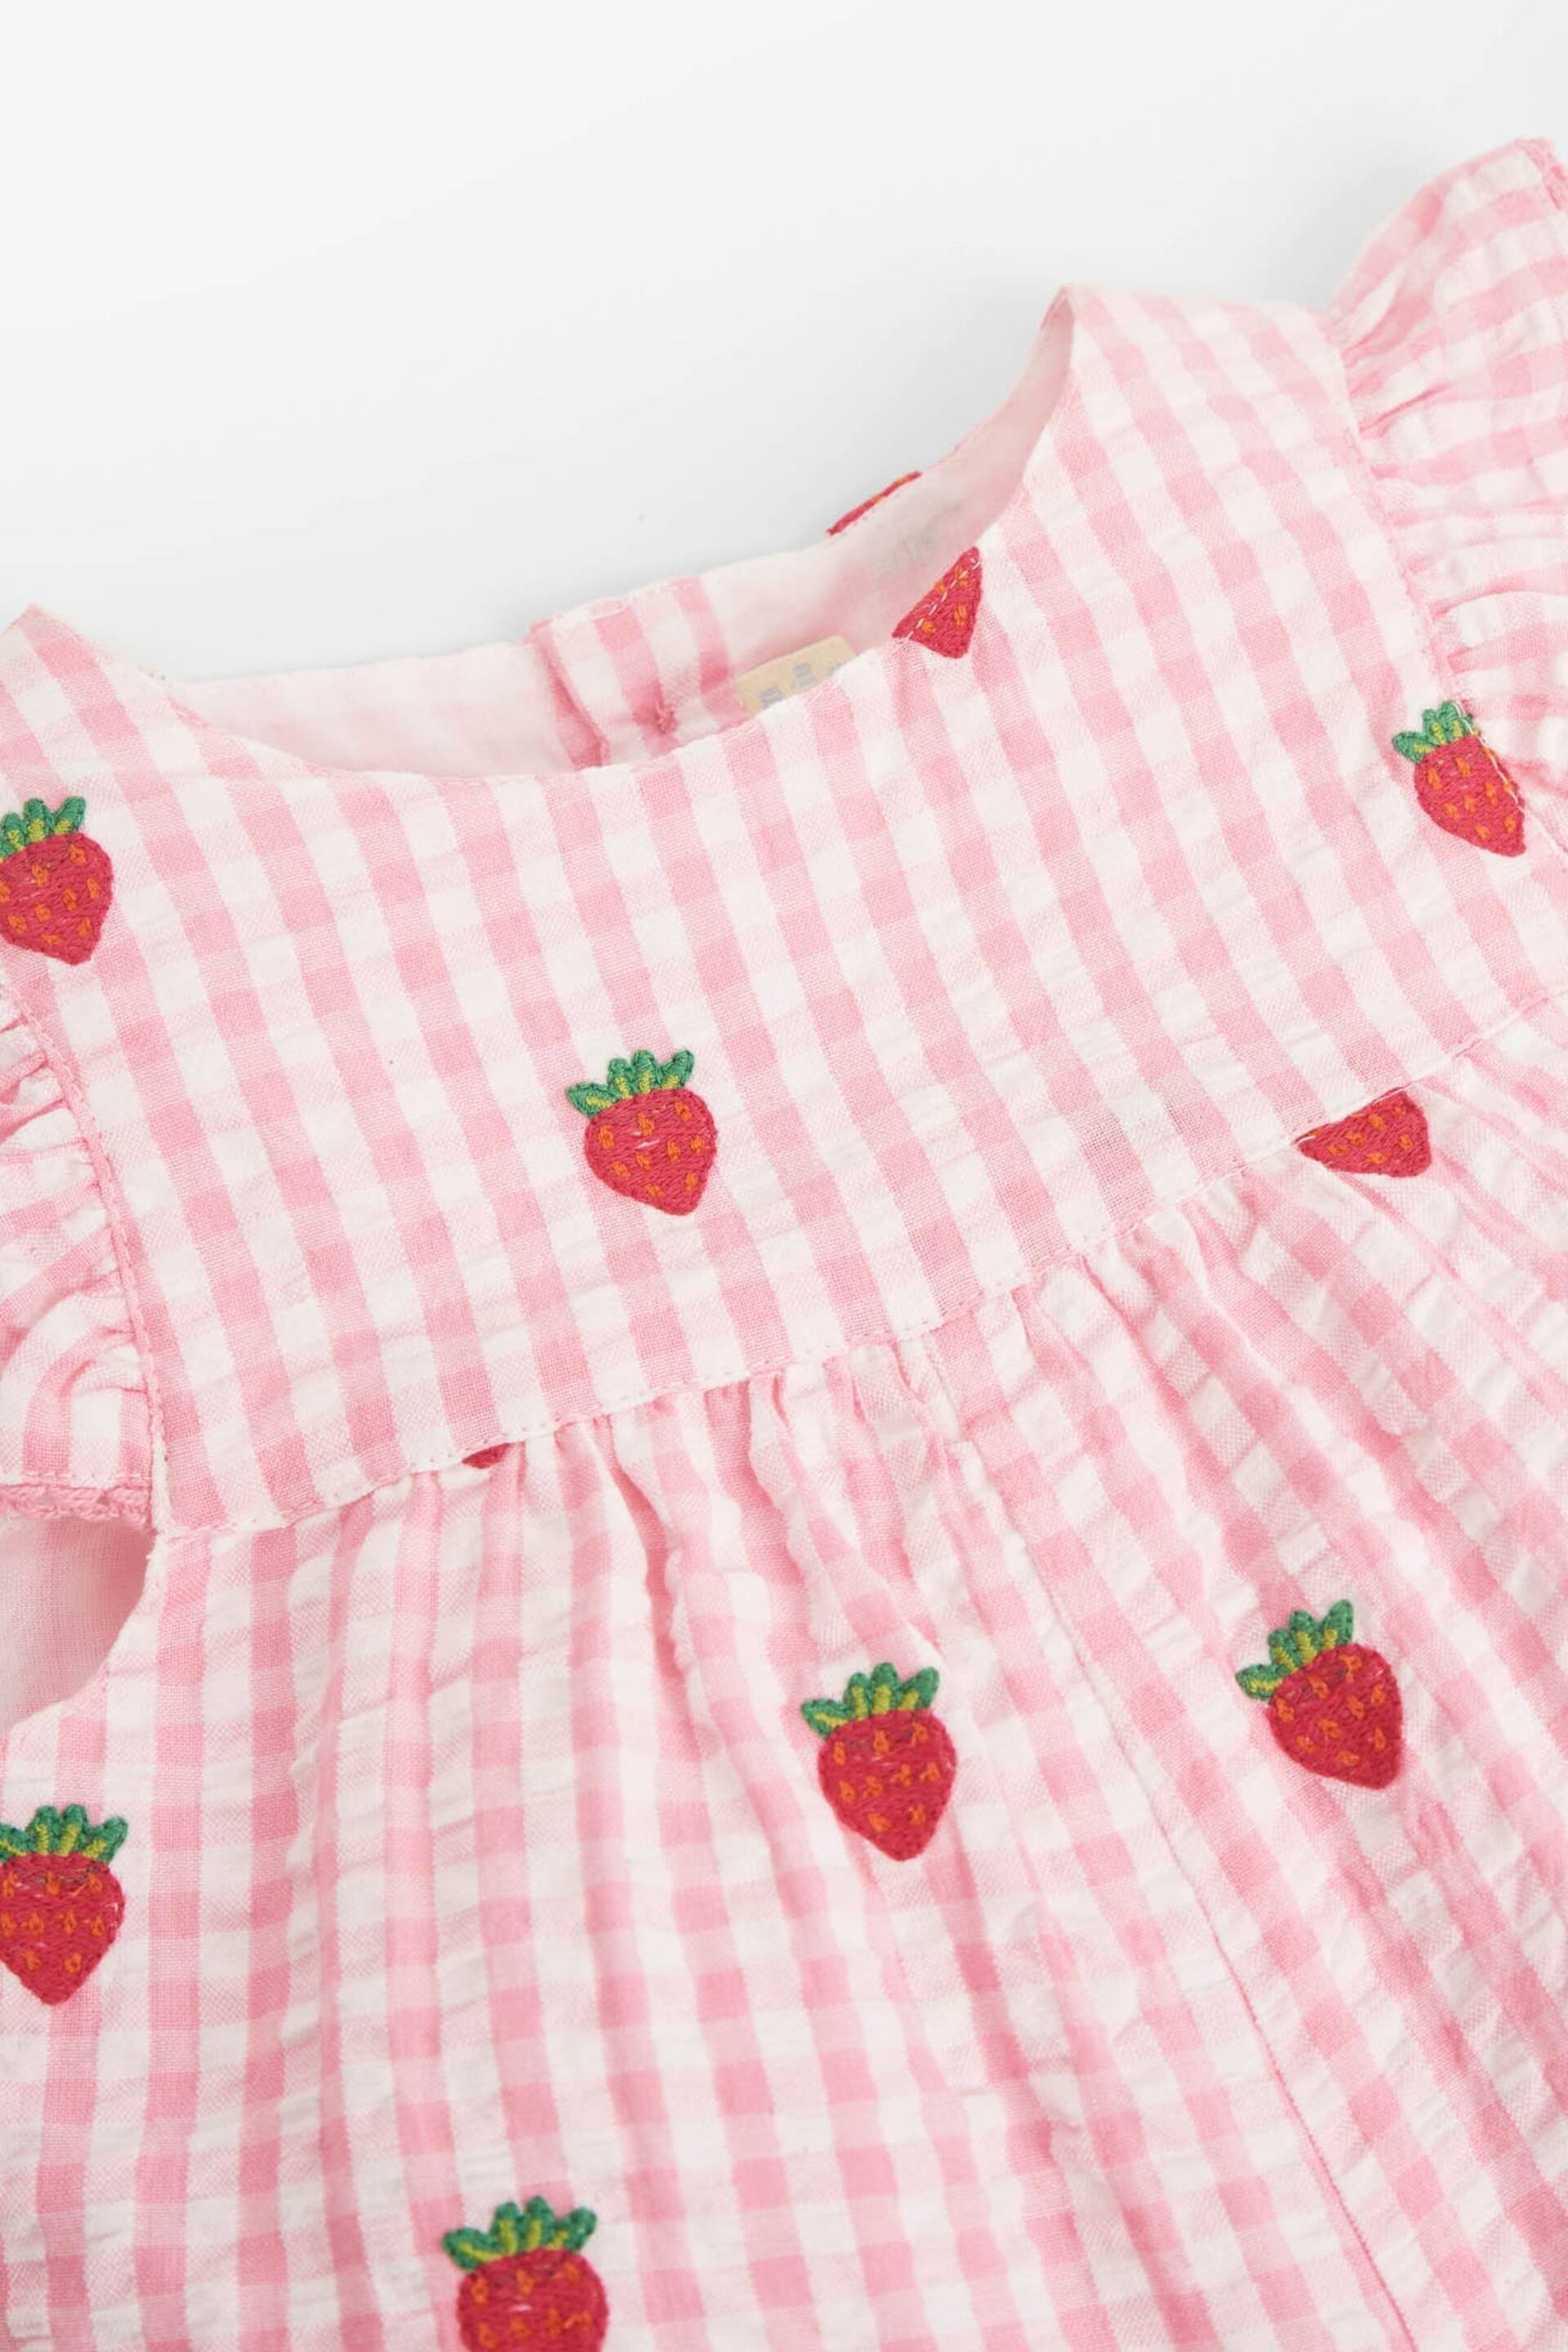 JoJo Maman Bébé Pink Gingham Strawberry Embroidered Pretty Sunsuit - Image 5 of 5